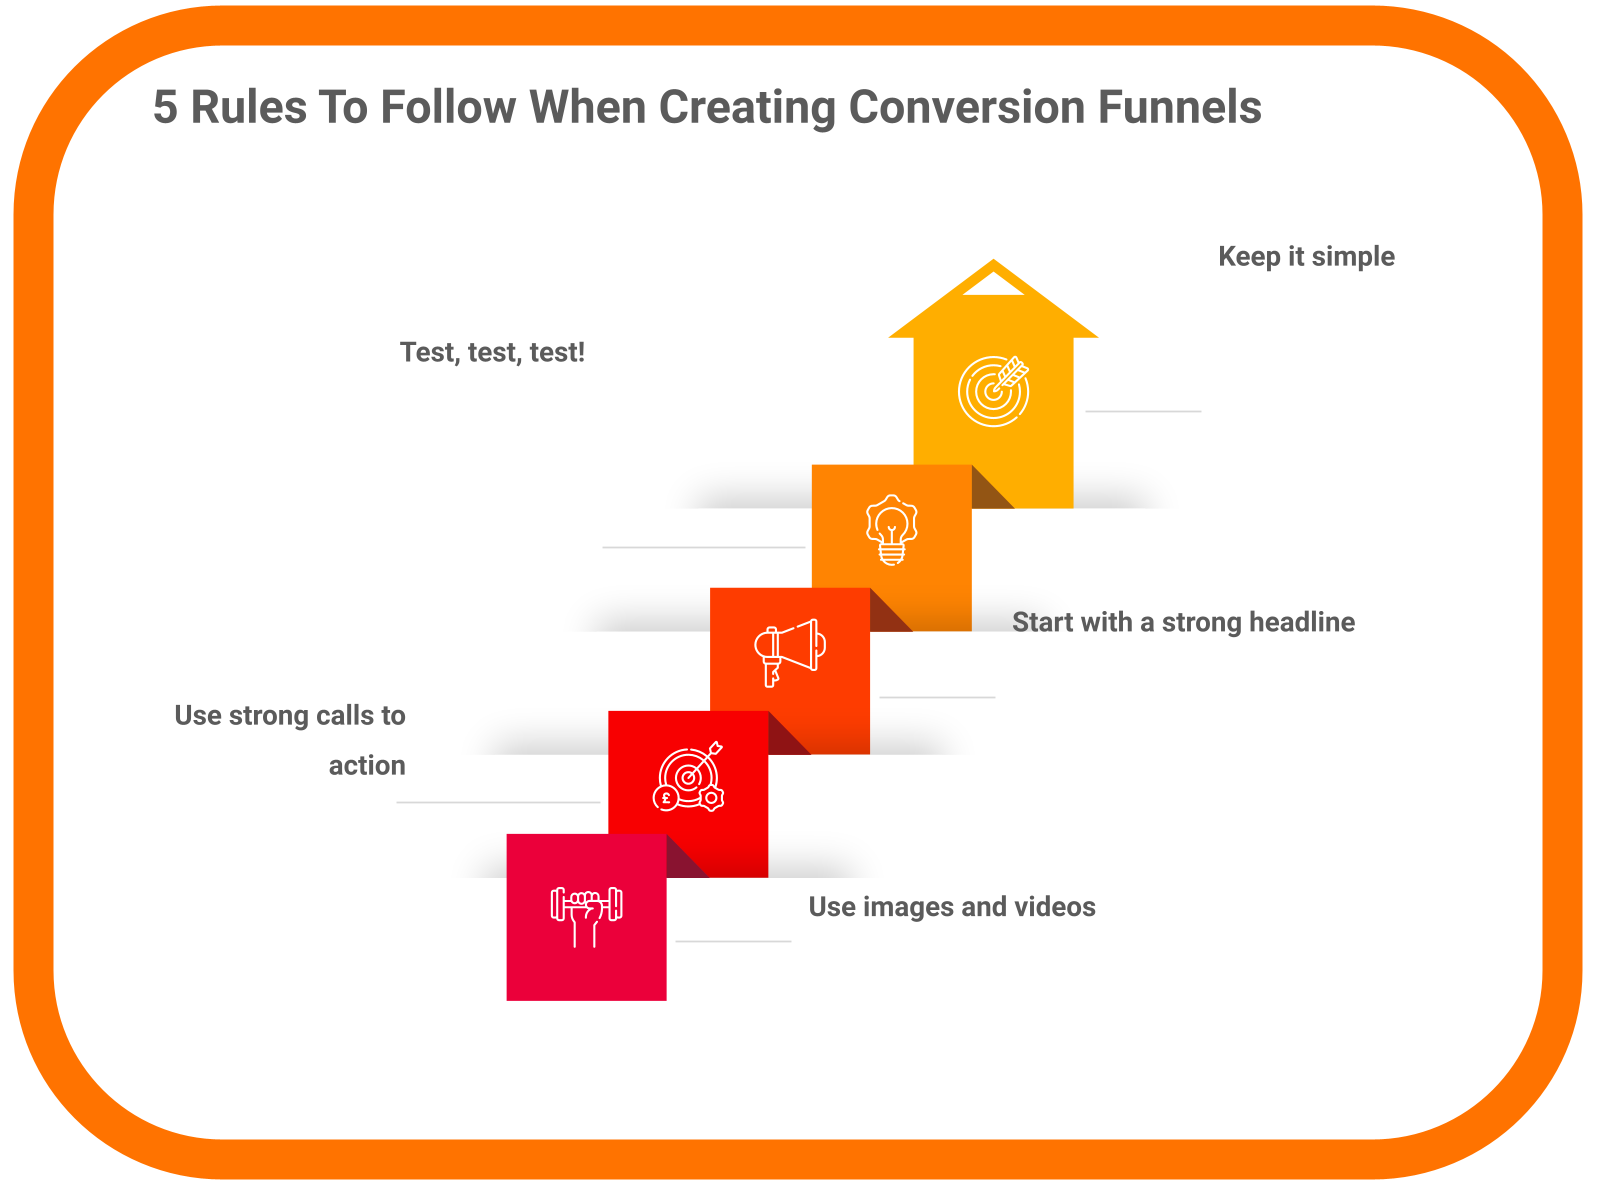 5 Rules To Follow When Creating Conversion Funnels